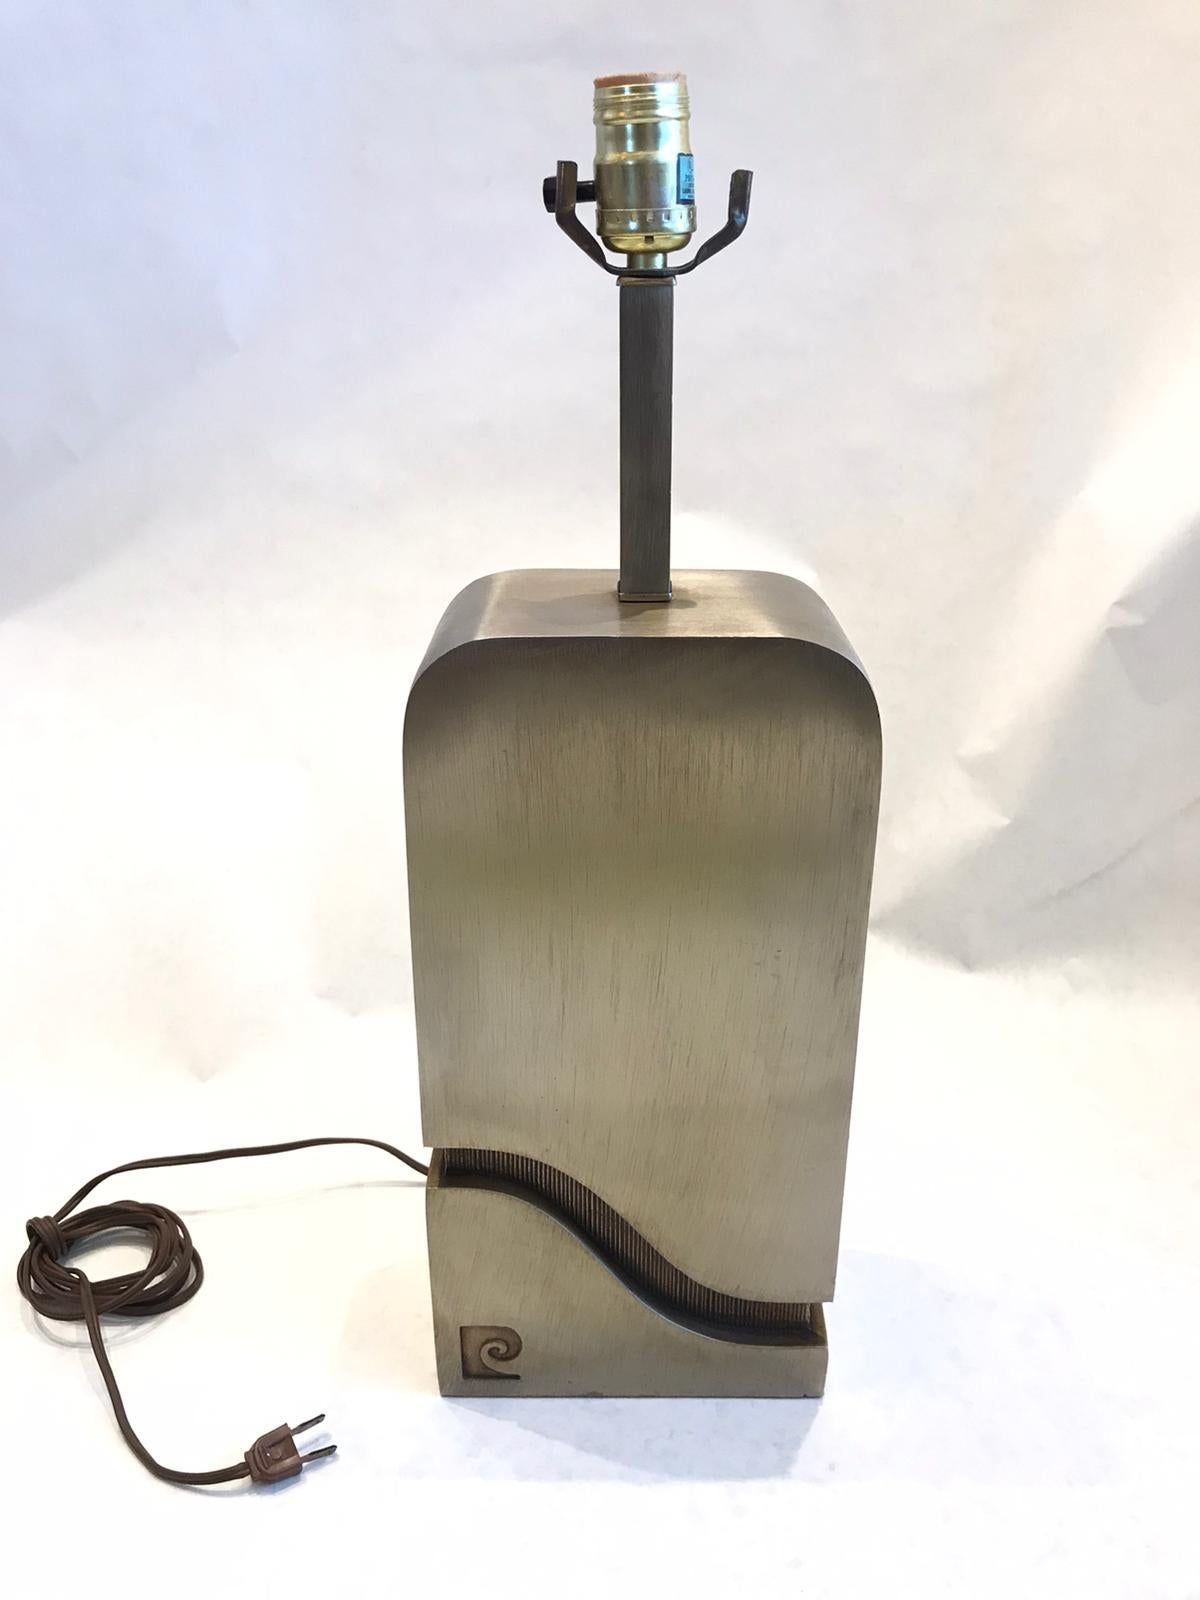 Modern bronze finish steel table lamp with heavy rectangular body, created by Pierre Cardin in the 1970s. The piece has the Pierre Cardin monogram on the front side and is in great vintage condition, with some age-appropriate patina and wear.